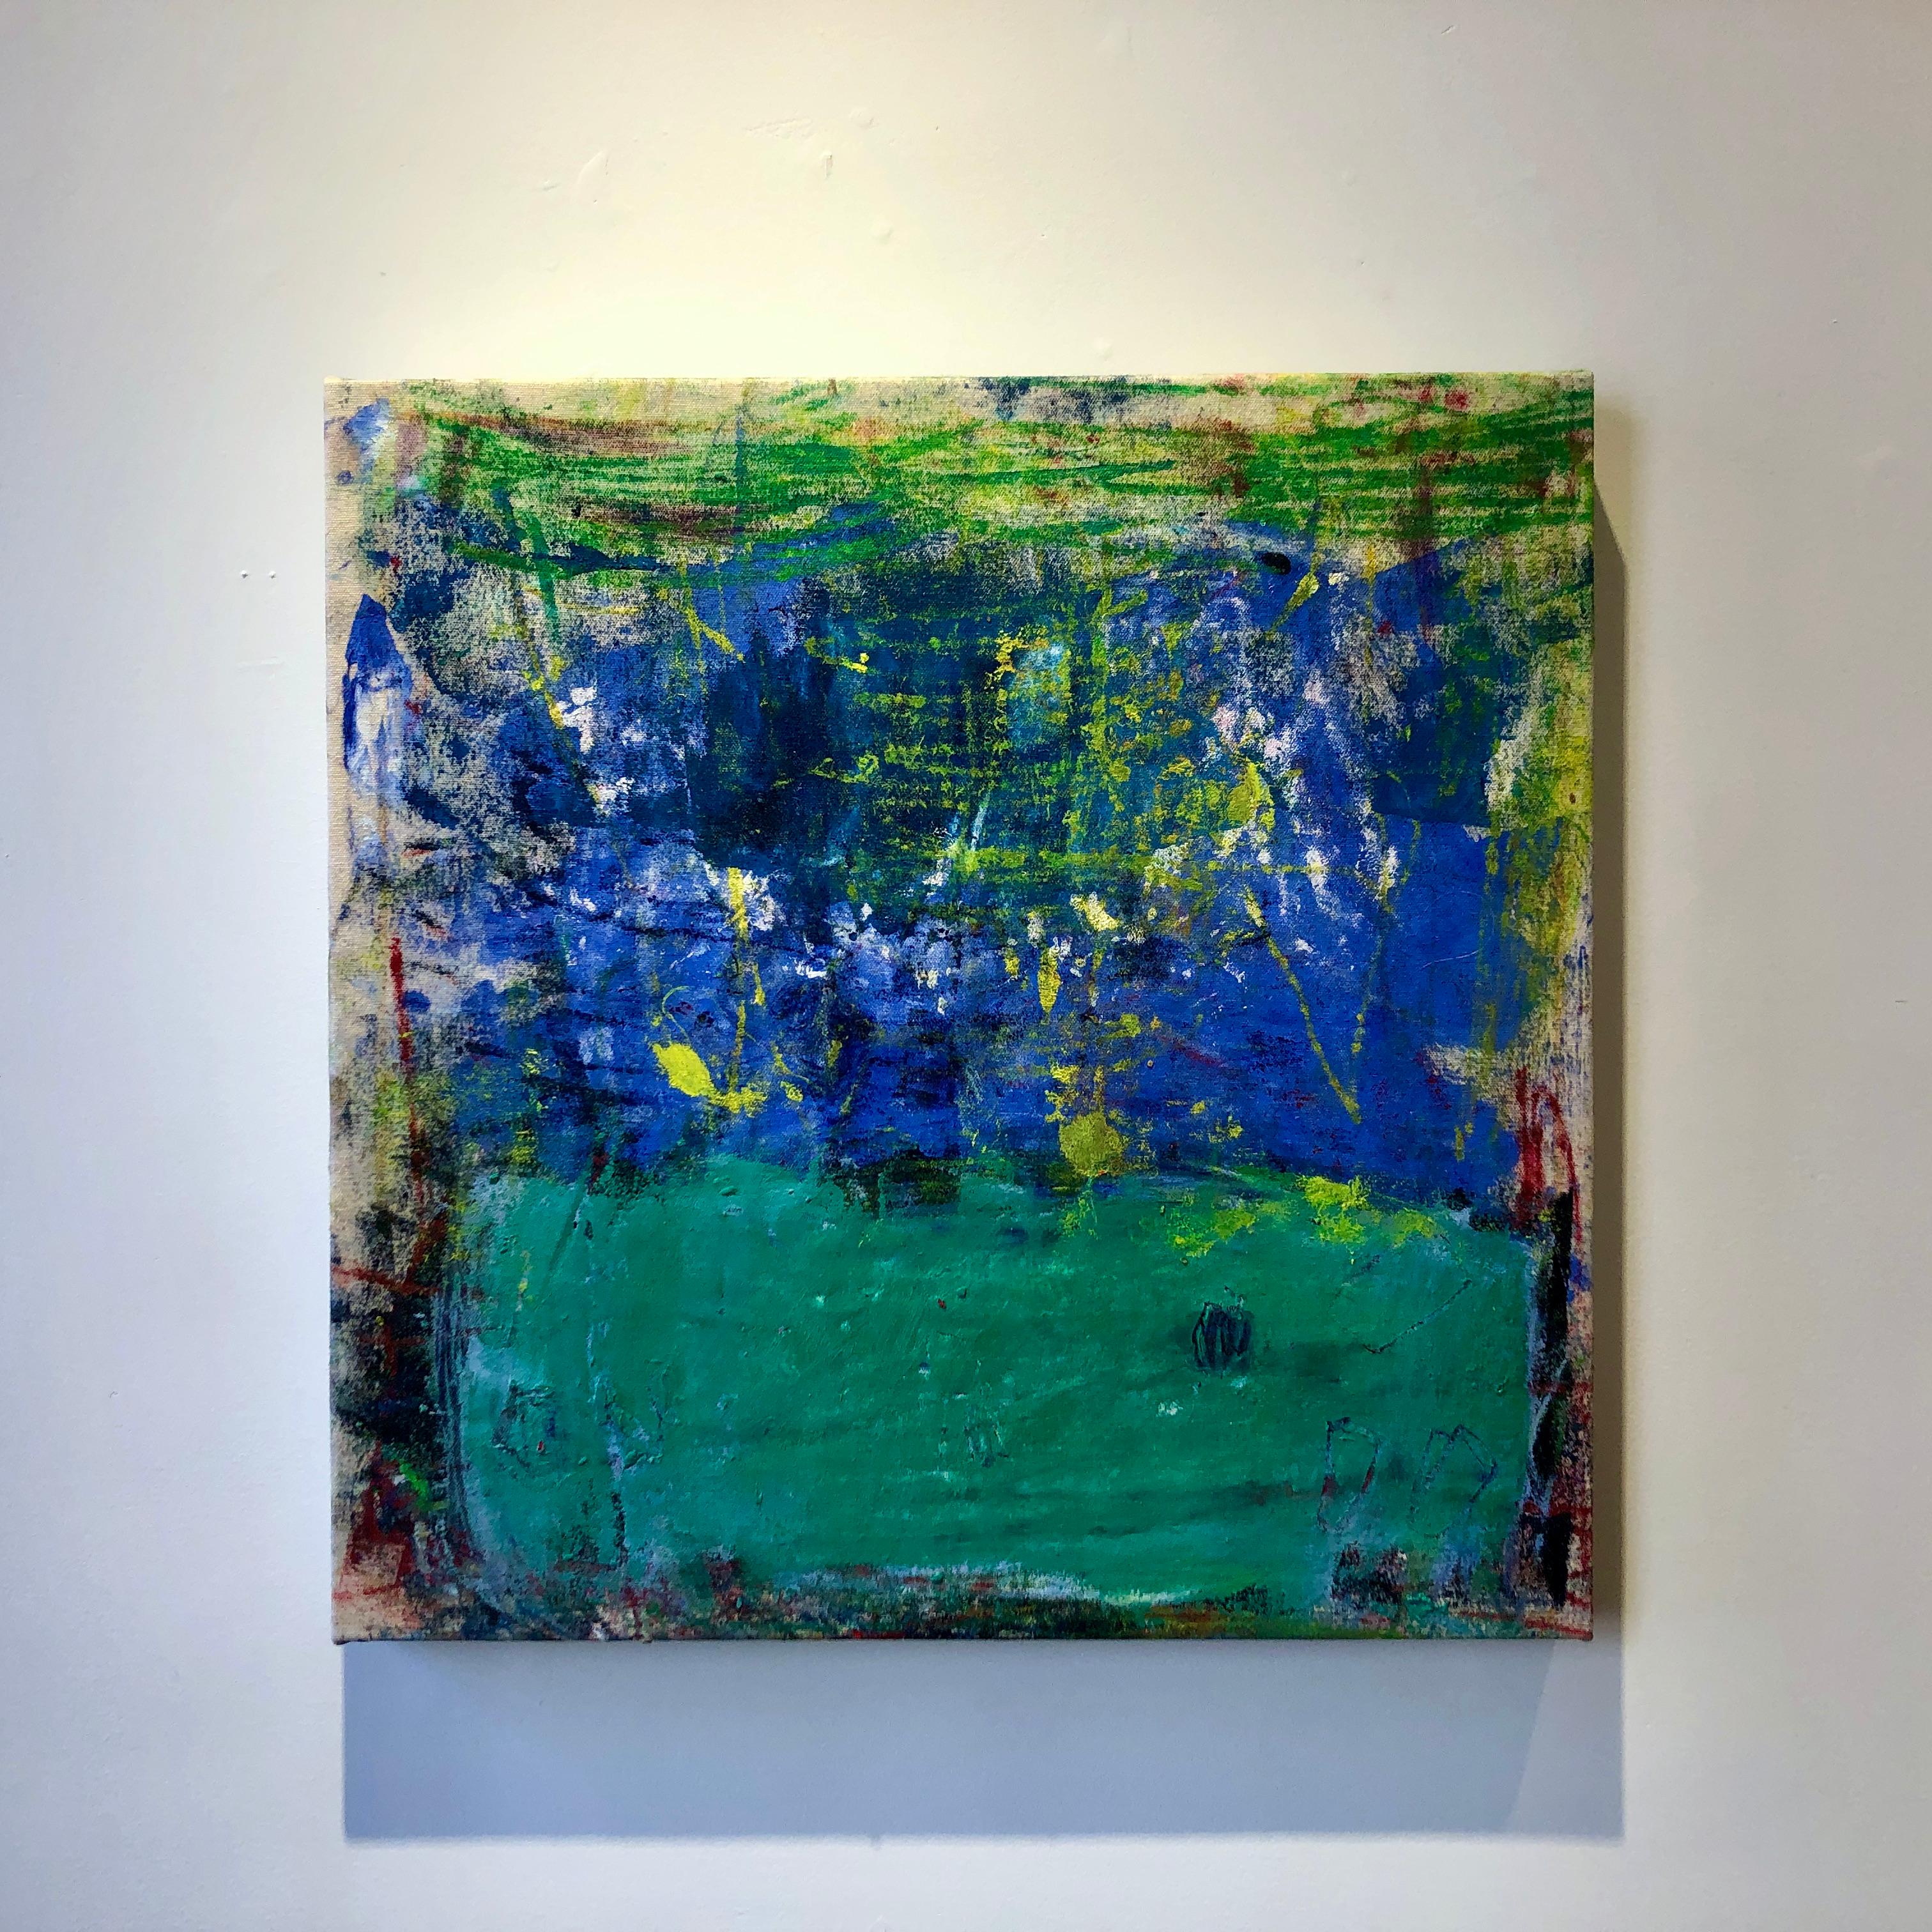 Estrella, bright blue and green abstract expressionist oil painting on canvas - Painting by Margaret Fitzgerald